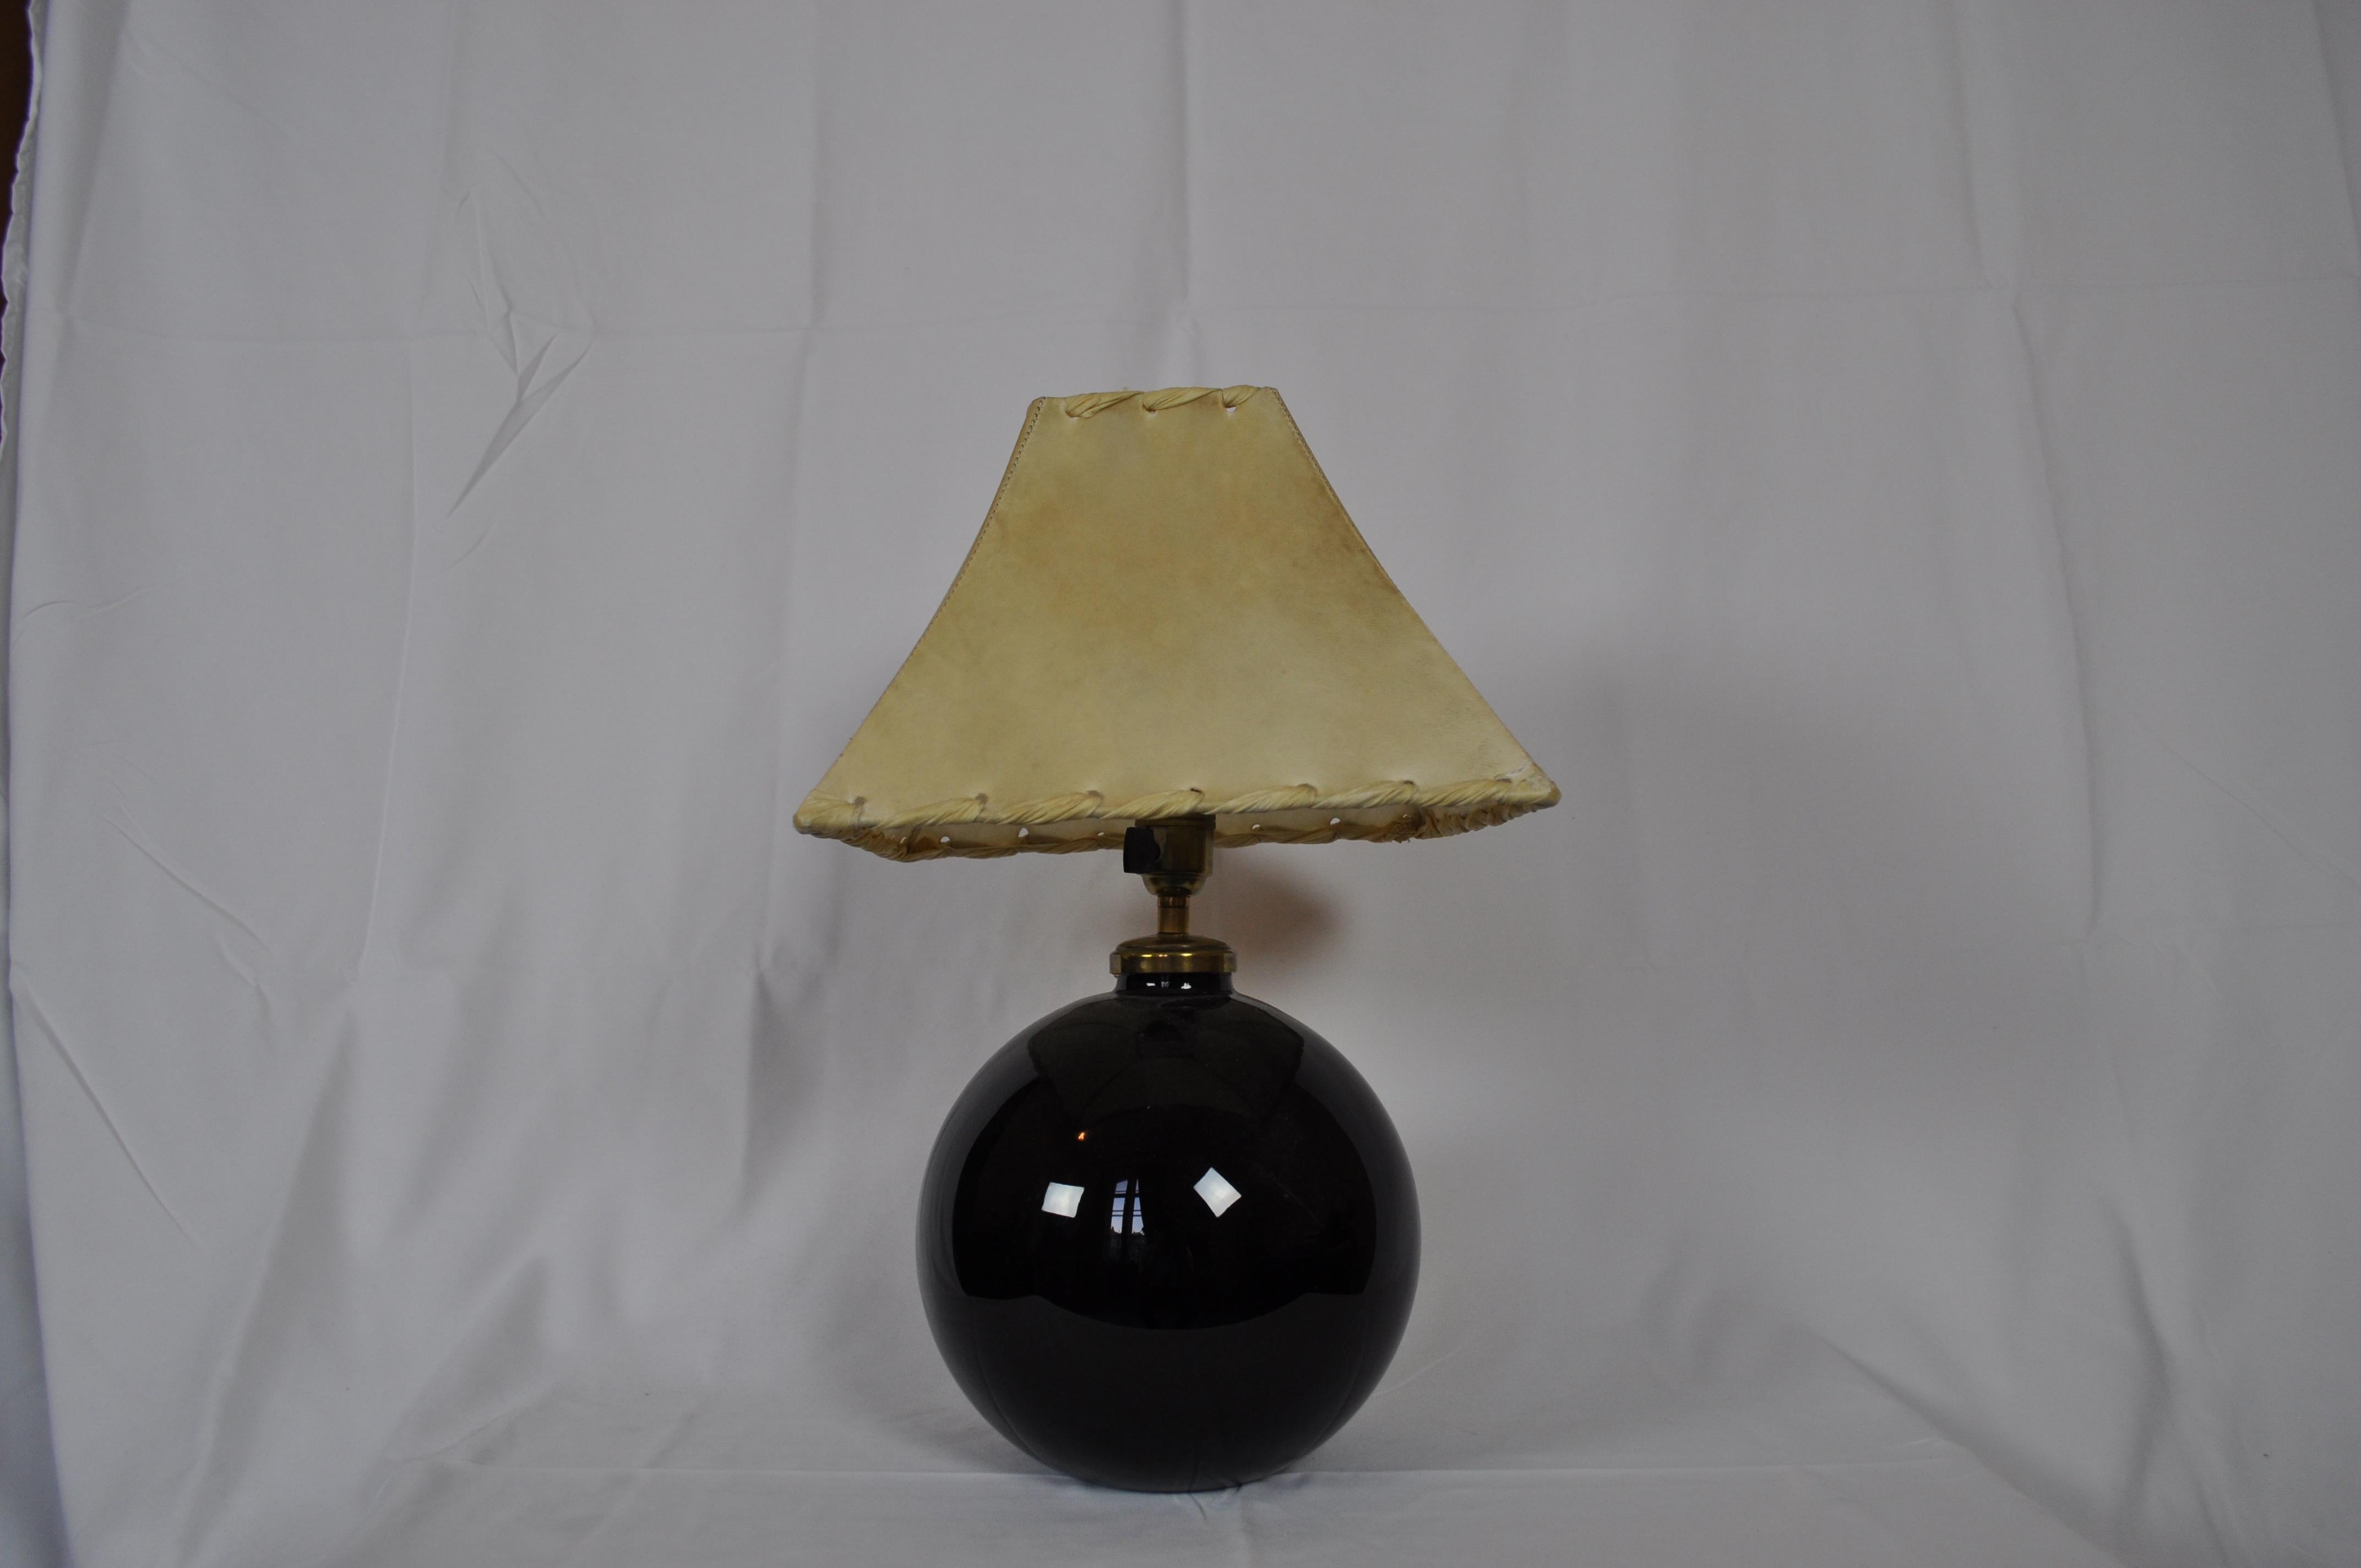 Art Deco table lamp designed and produced by Jacques Adnet in the 1940s. The lamp is made in black opaline, details in brass and parchemunt top. The lamp comes with authentication document.